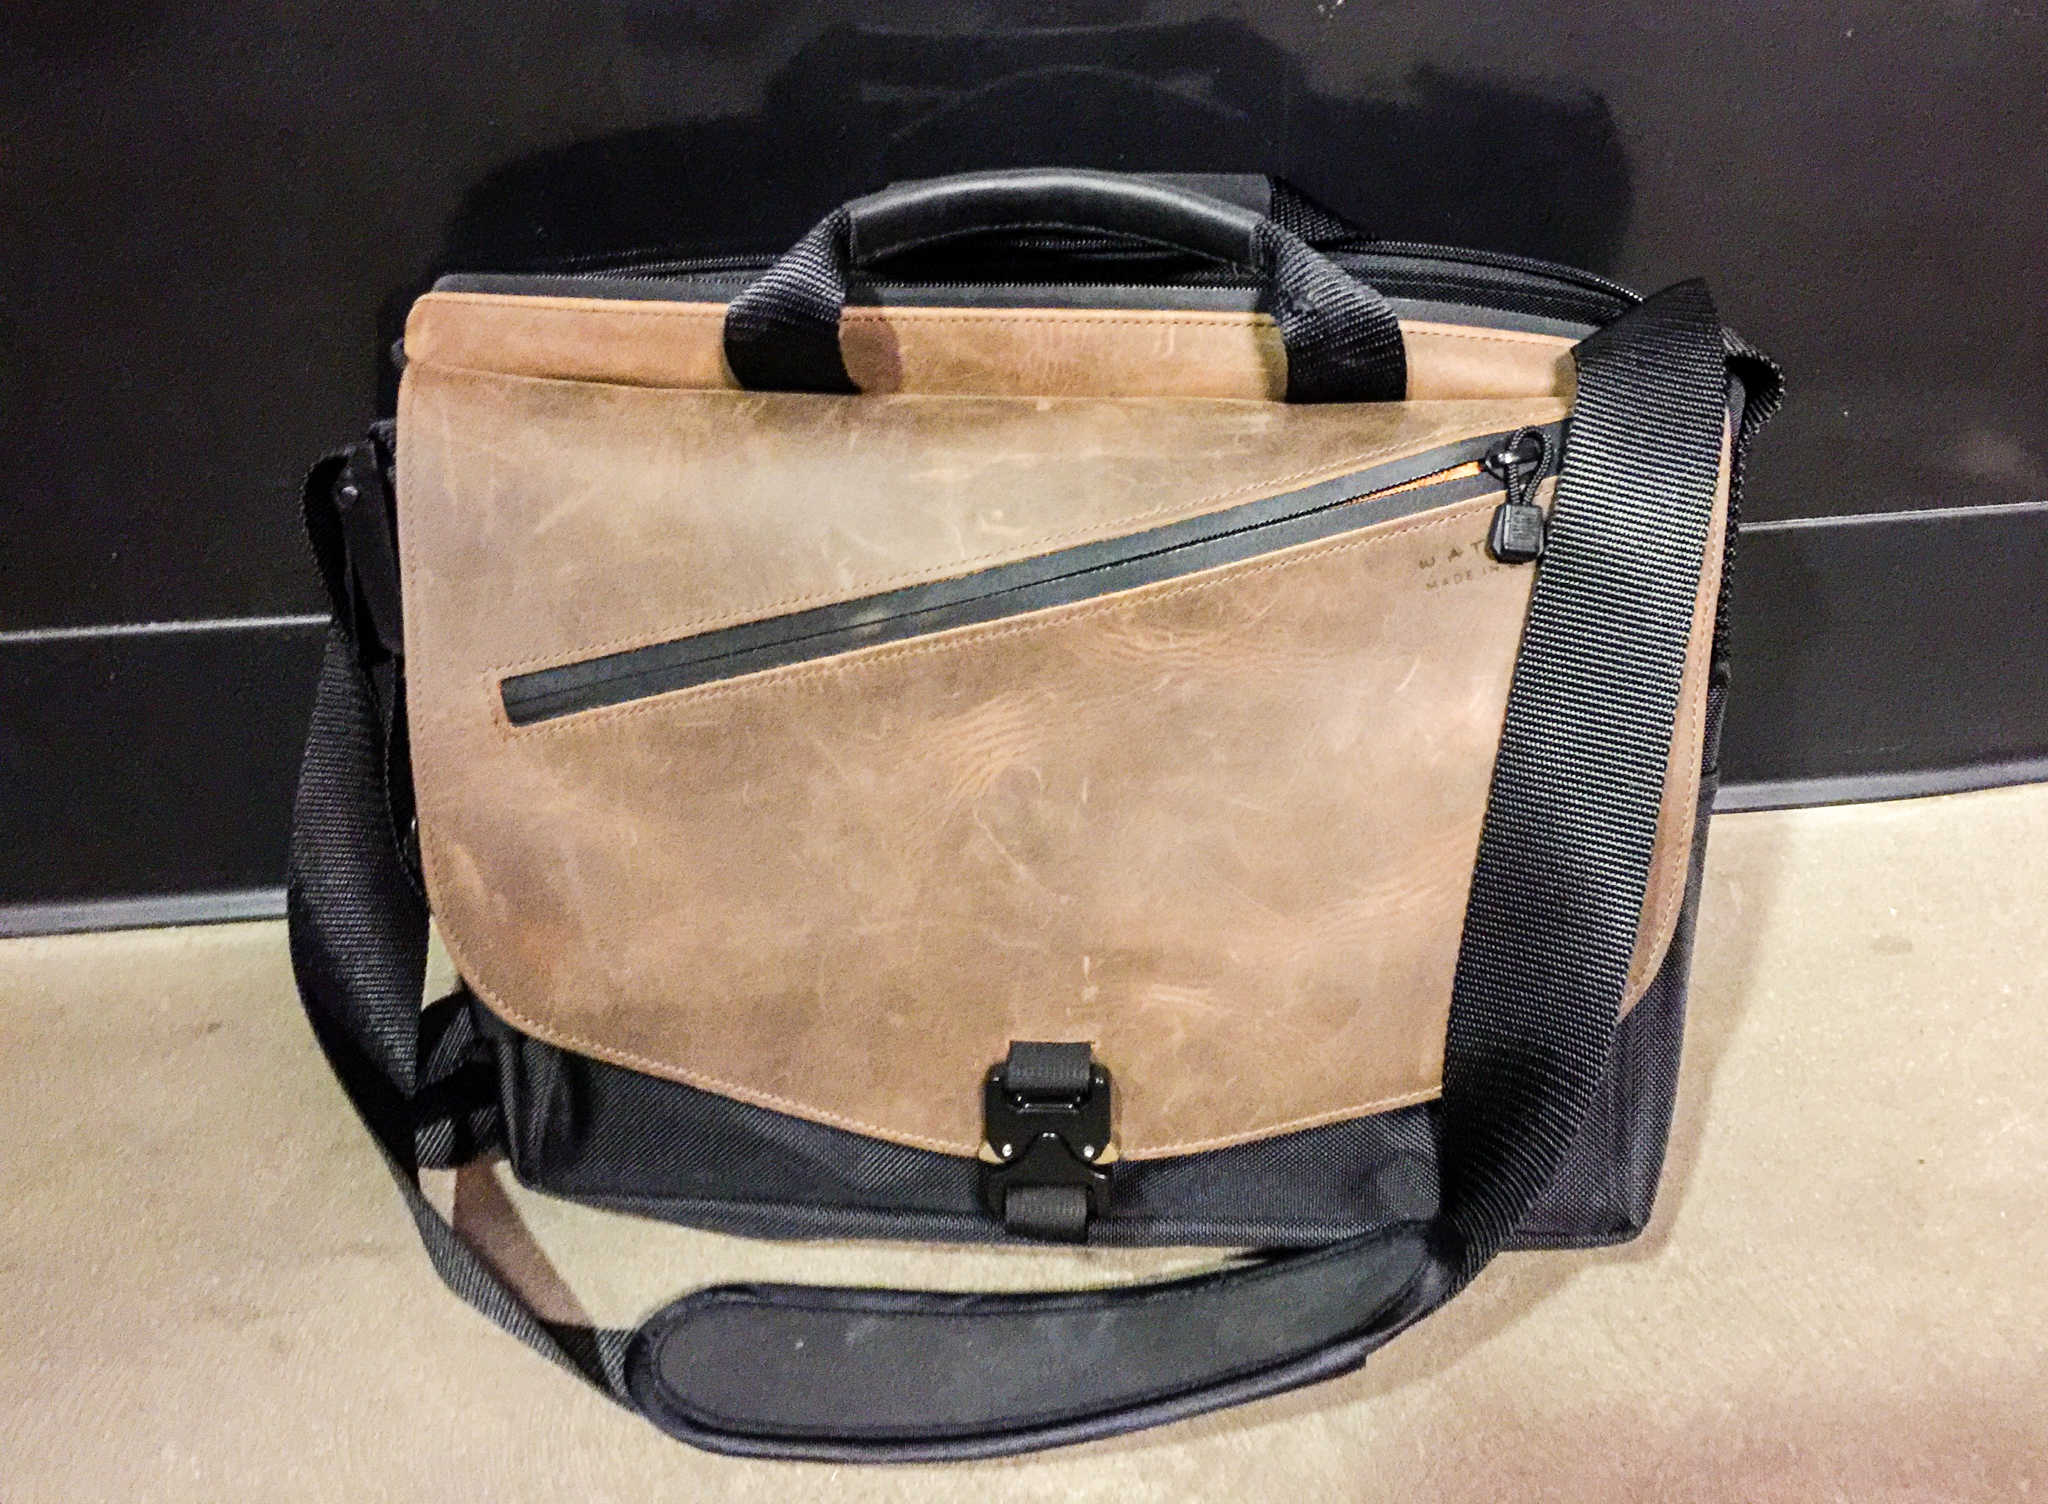 Waterfield's new Cargo Laptop Bag has a ton of space without sacrificing looks.